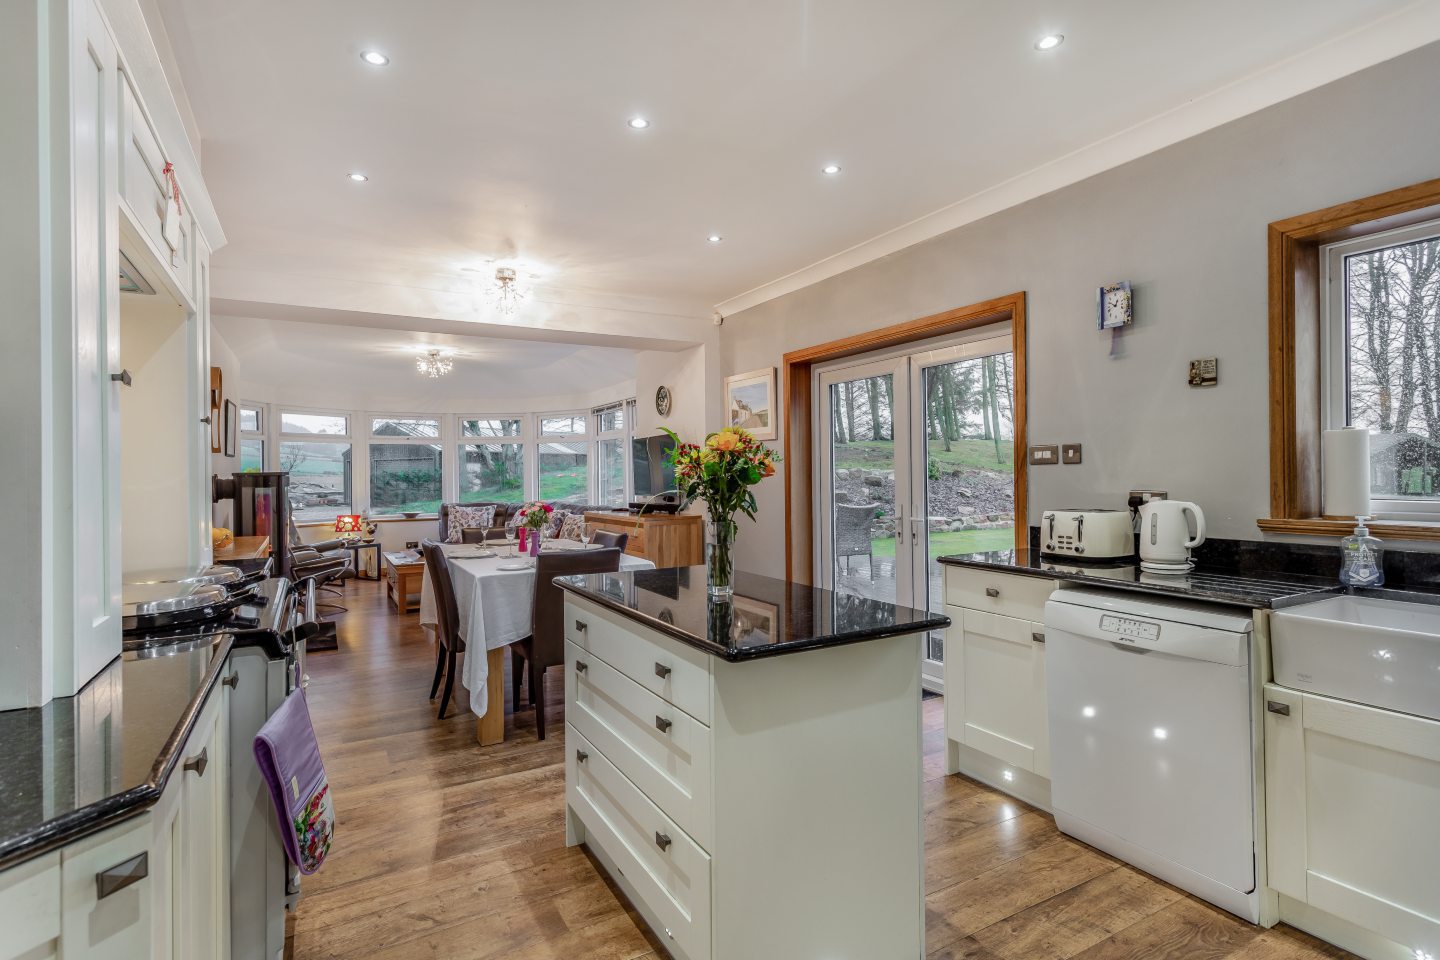 The property's sleek and stylish kitchen with views over the countryside near Aberdeen.